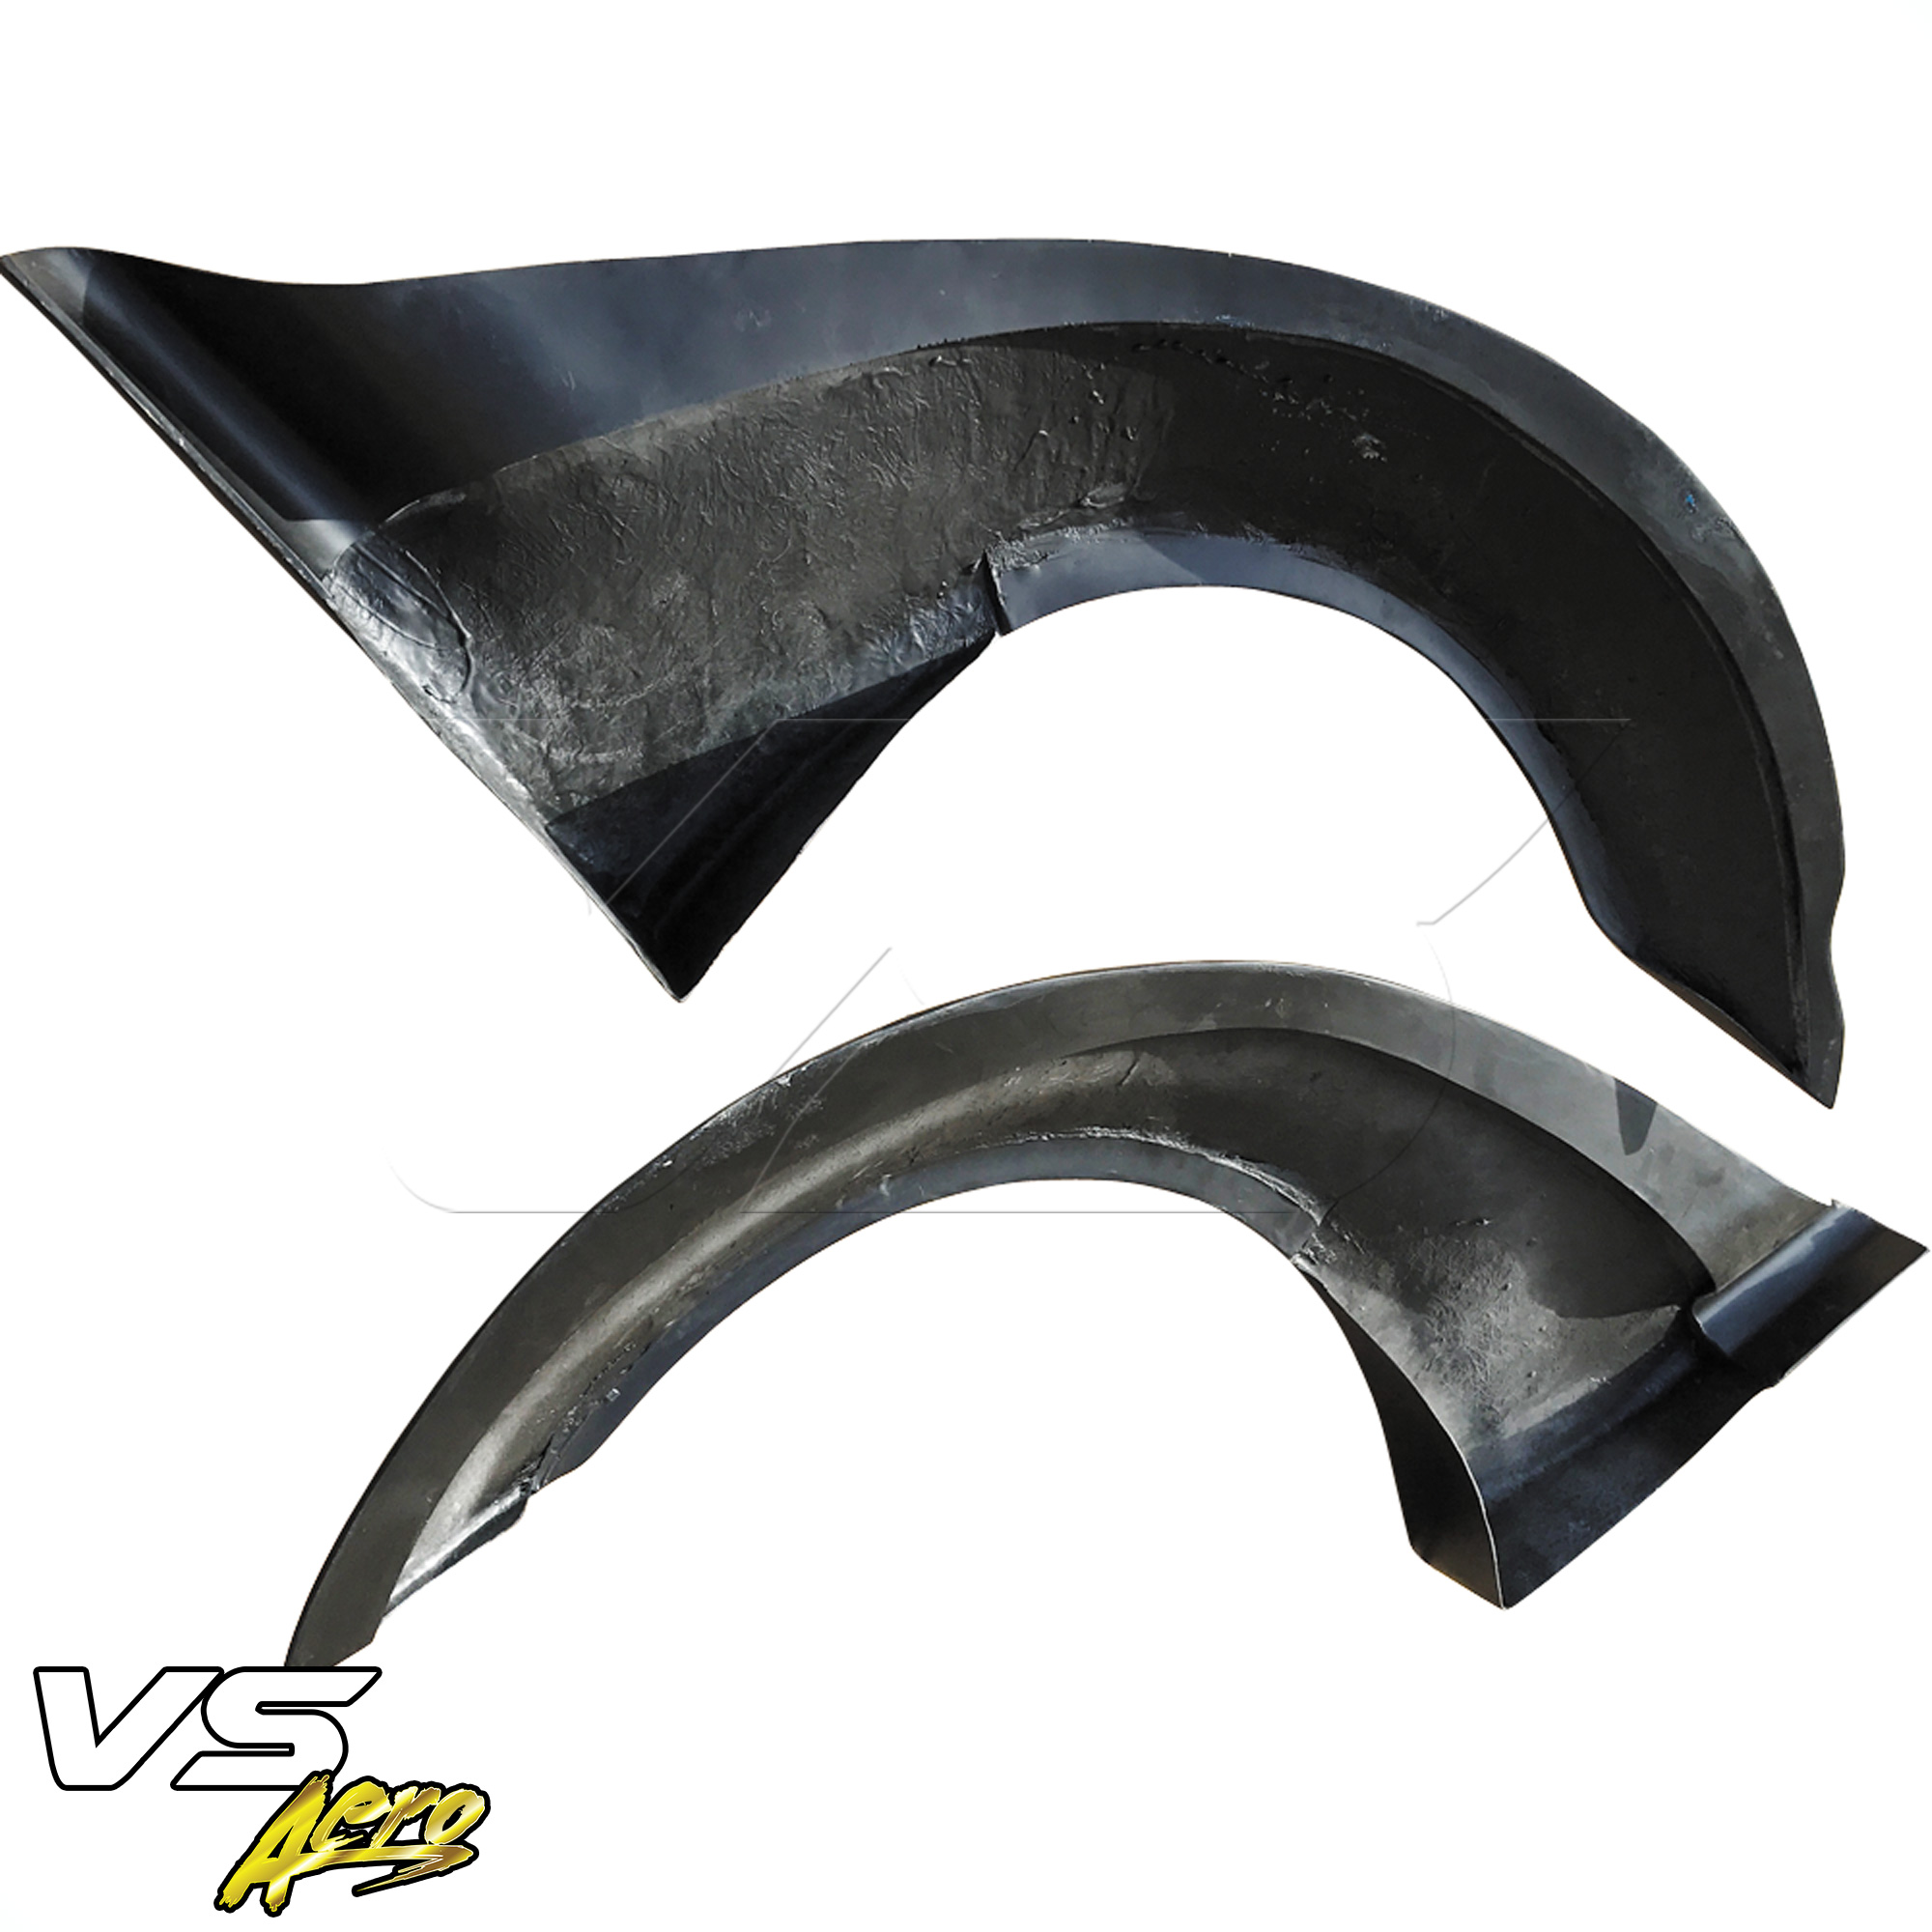 VSaero FRP LBPE Wide Body Fender Flares (rear) 4pc > Infiniti G37 Coupe 2008-2015 > 2dr Coupe - Image 13